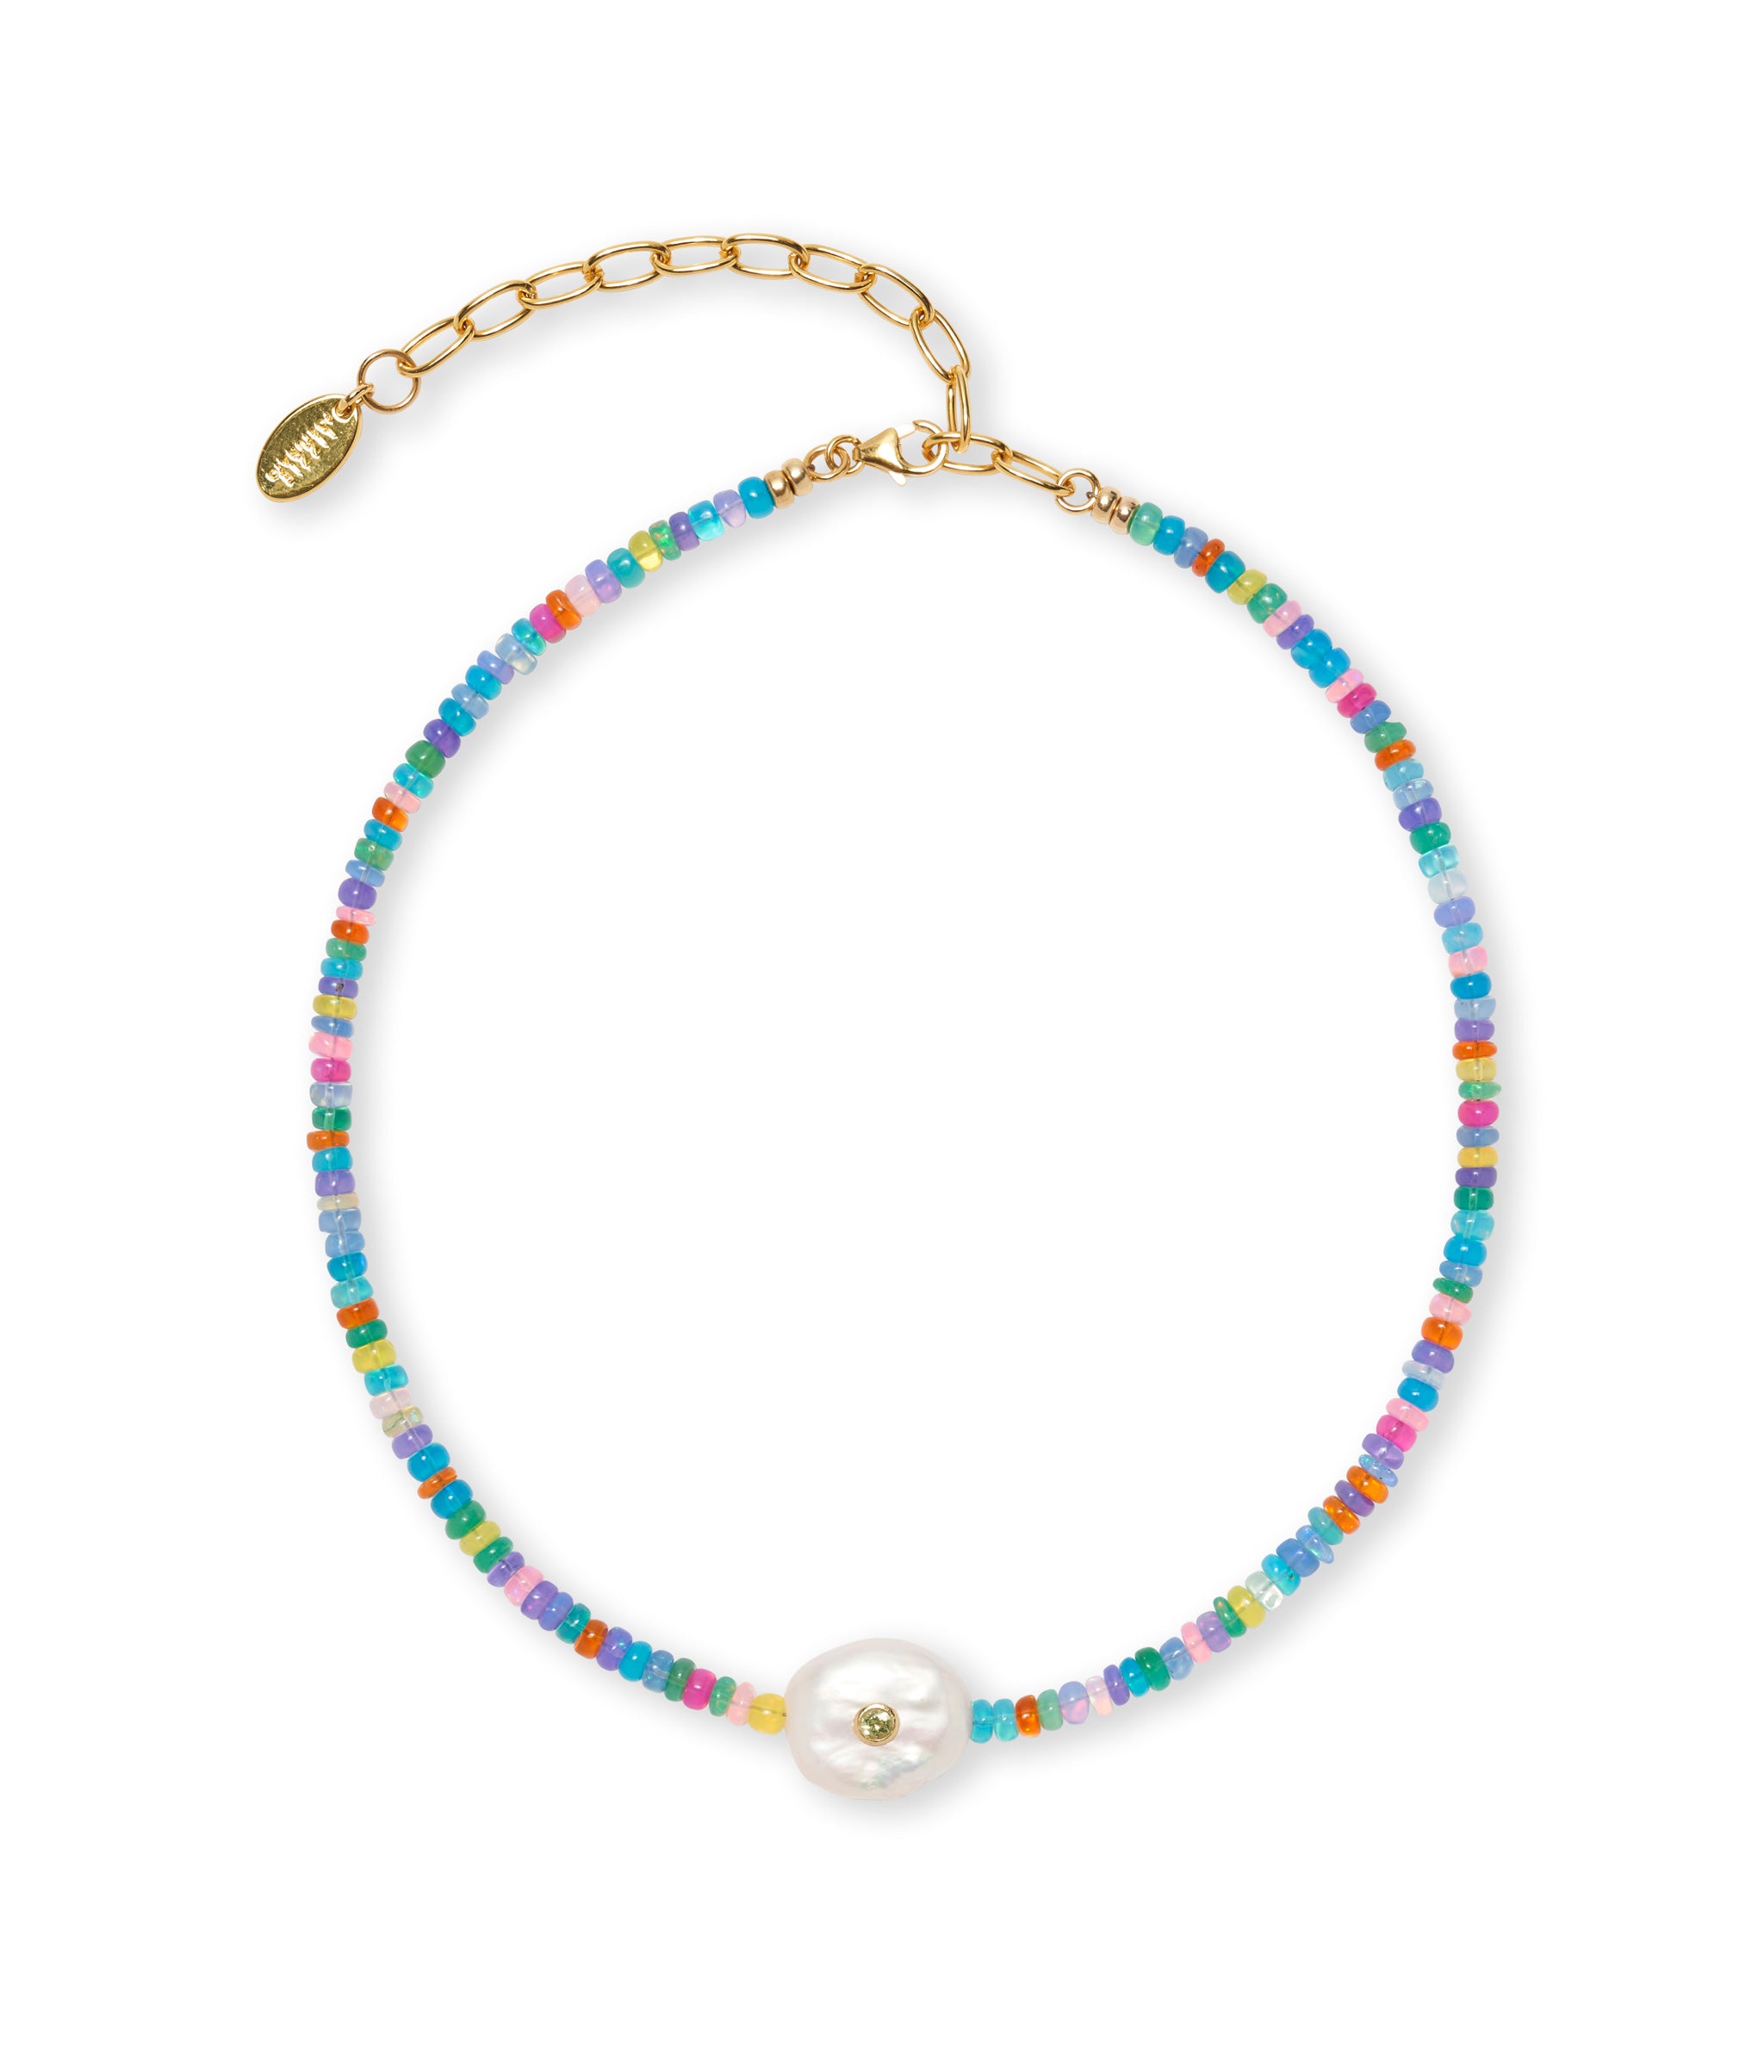 Destination Necklace in Rainbow Opal. Features gold-plated brass, Ethiopian opals, freshwater pearl and peridot.